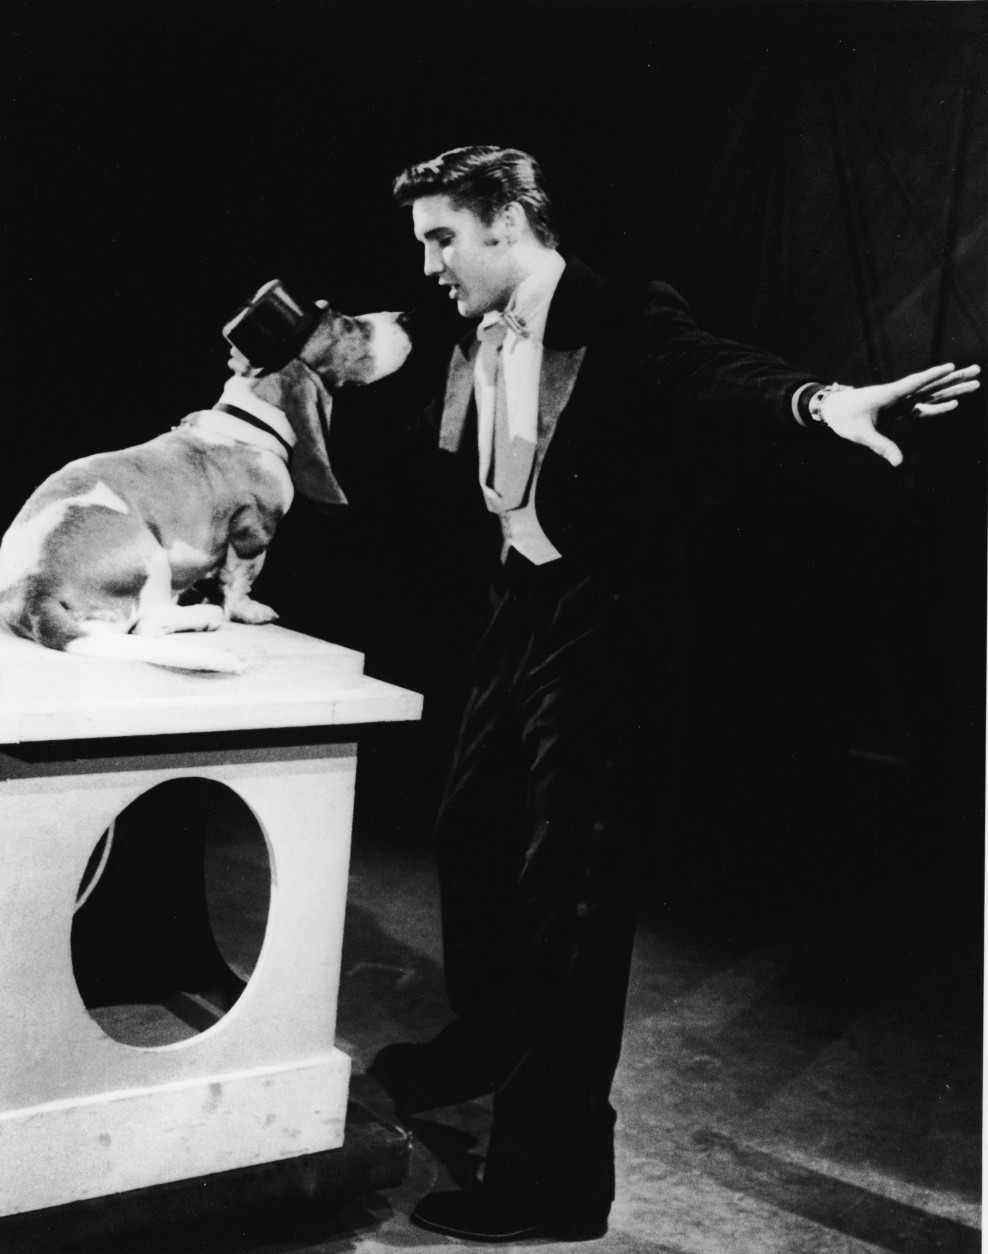 American rock singer Elvis Presley (1935 - 1977) serenades a basset hound in a top hat with the song, 'Hound Dog' on the set of 'The Steve Allen Show,' July 1956. (Photo by NBC Television/Getty Images)